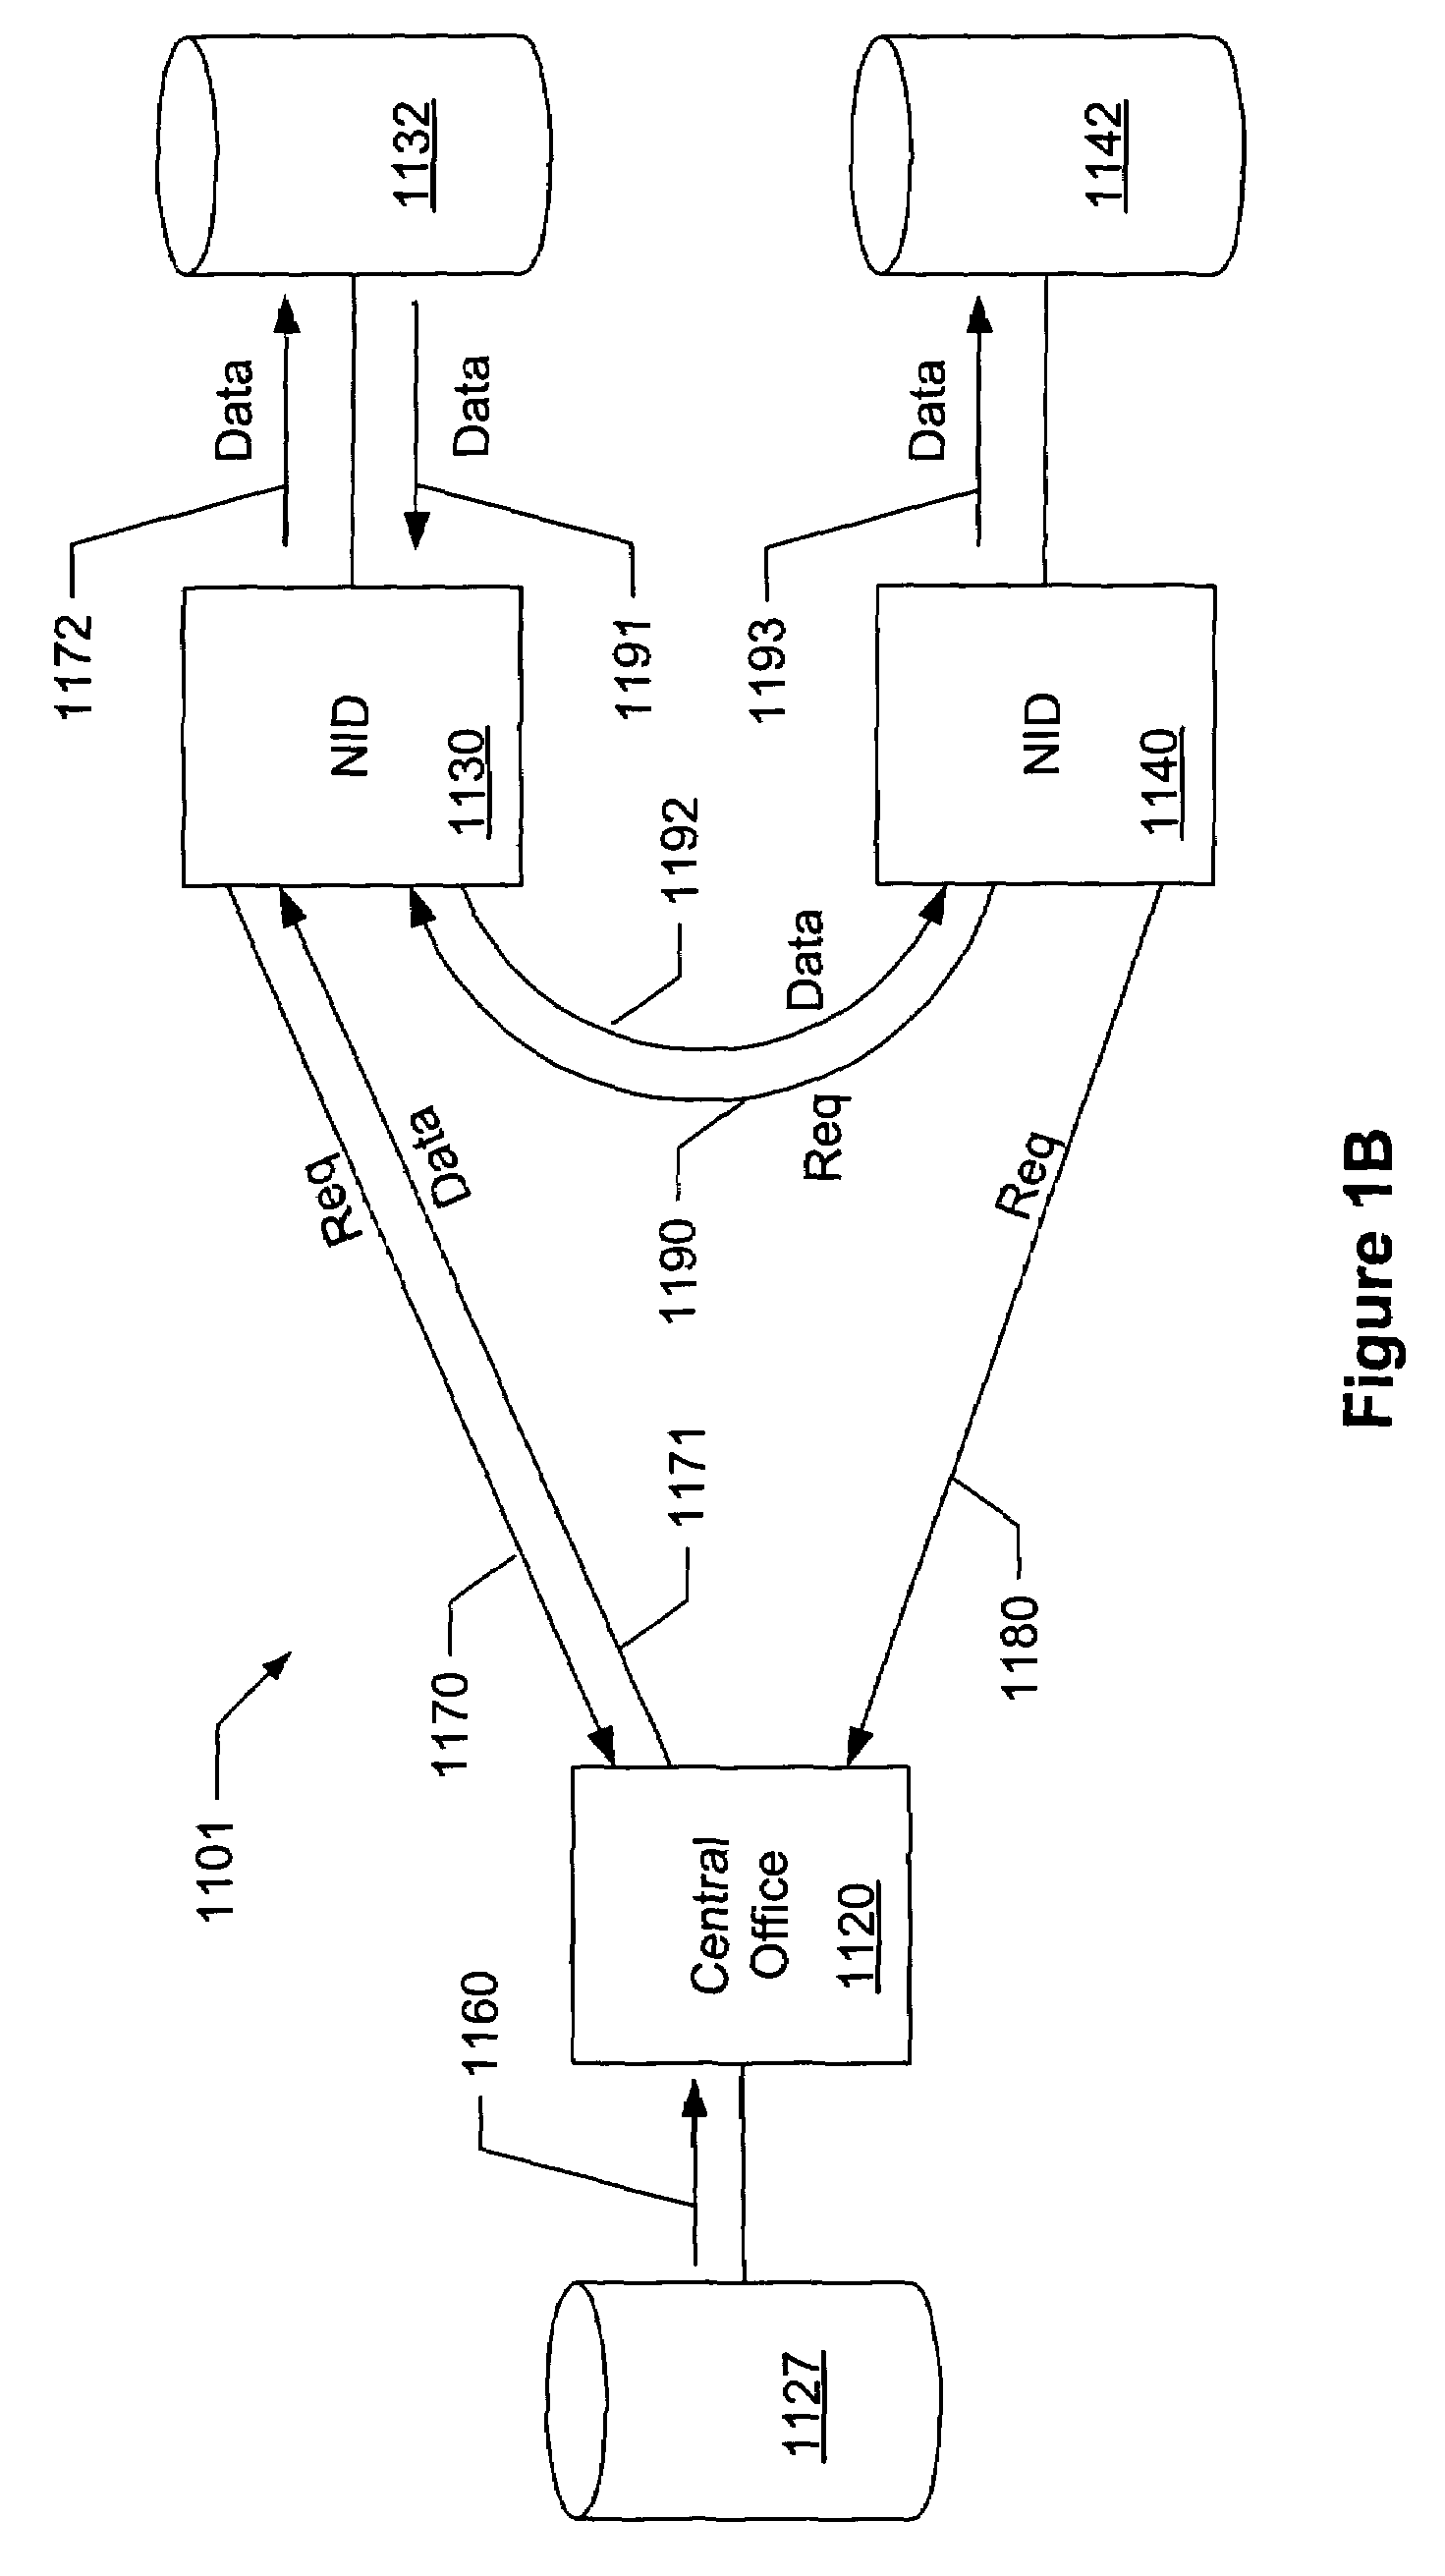 Systems and methods for distributing content objects in a telecommunication system